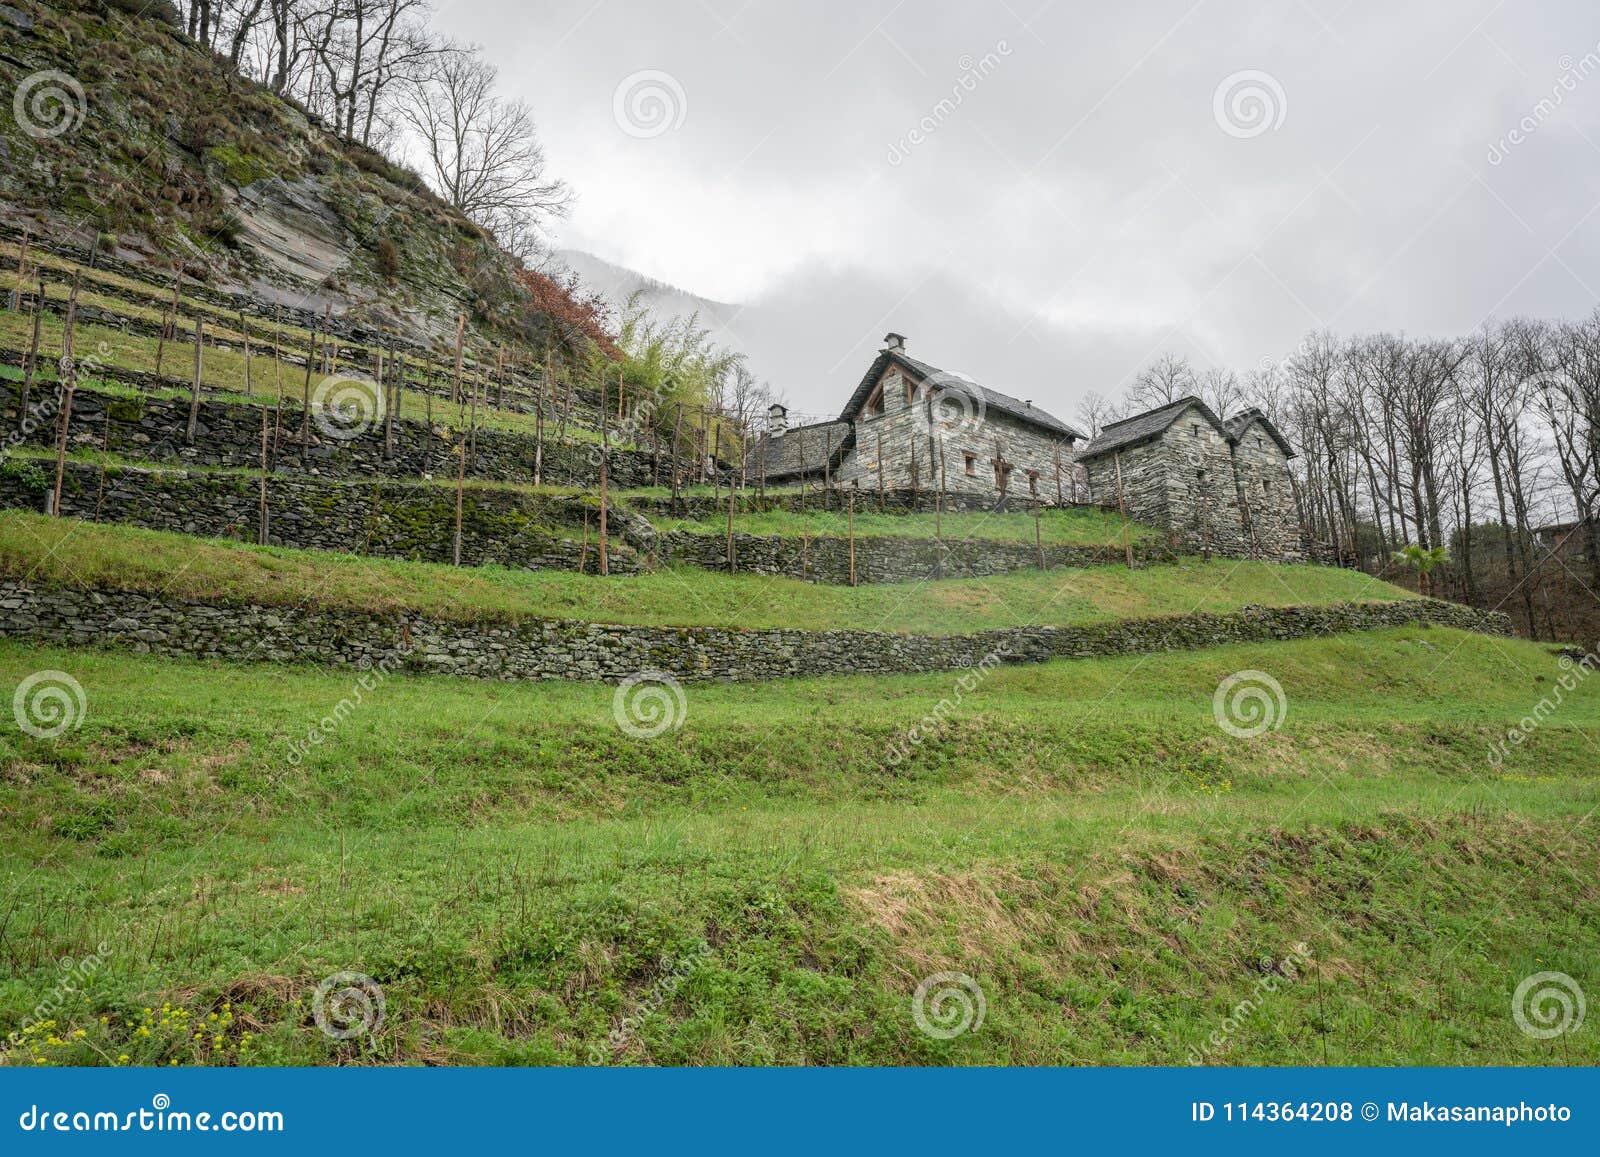 stone houses in the traditional rustico architecture style of the ticino in southern switzerland